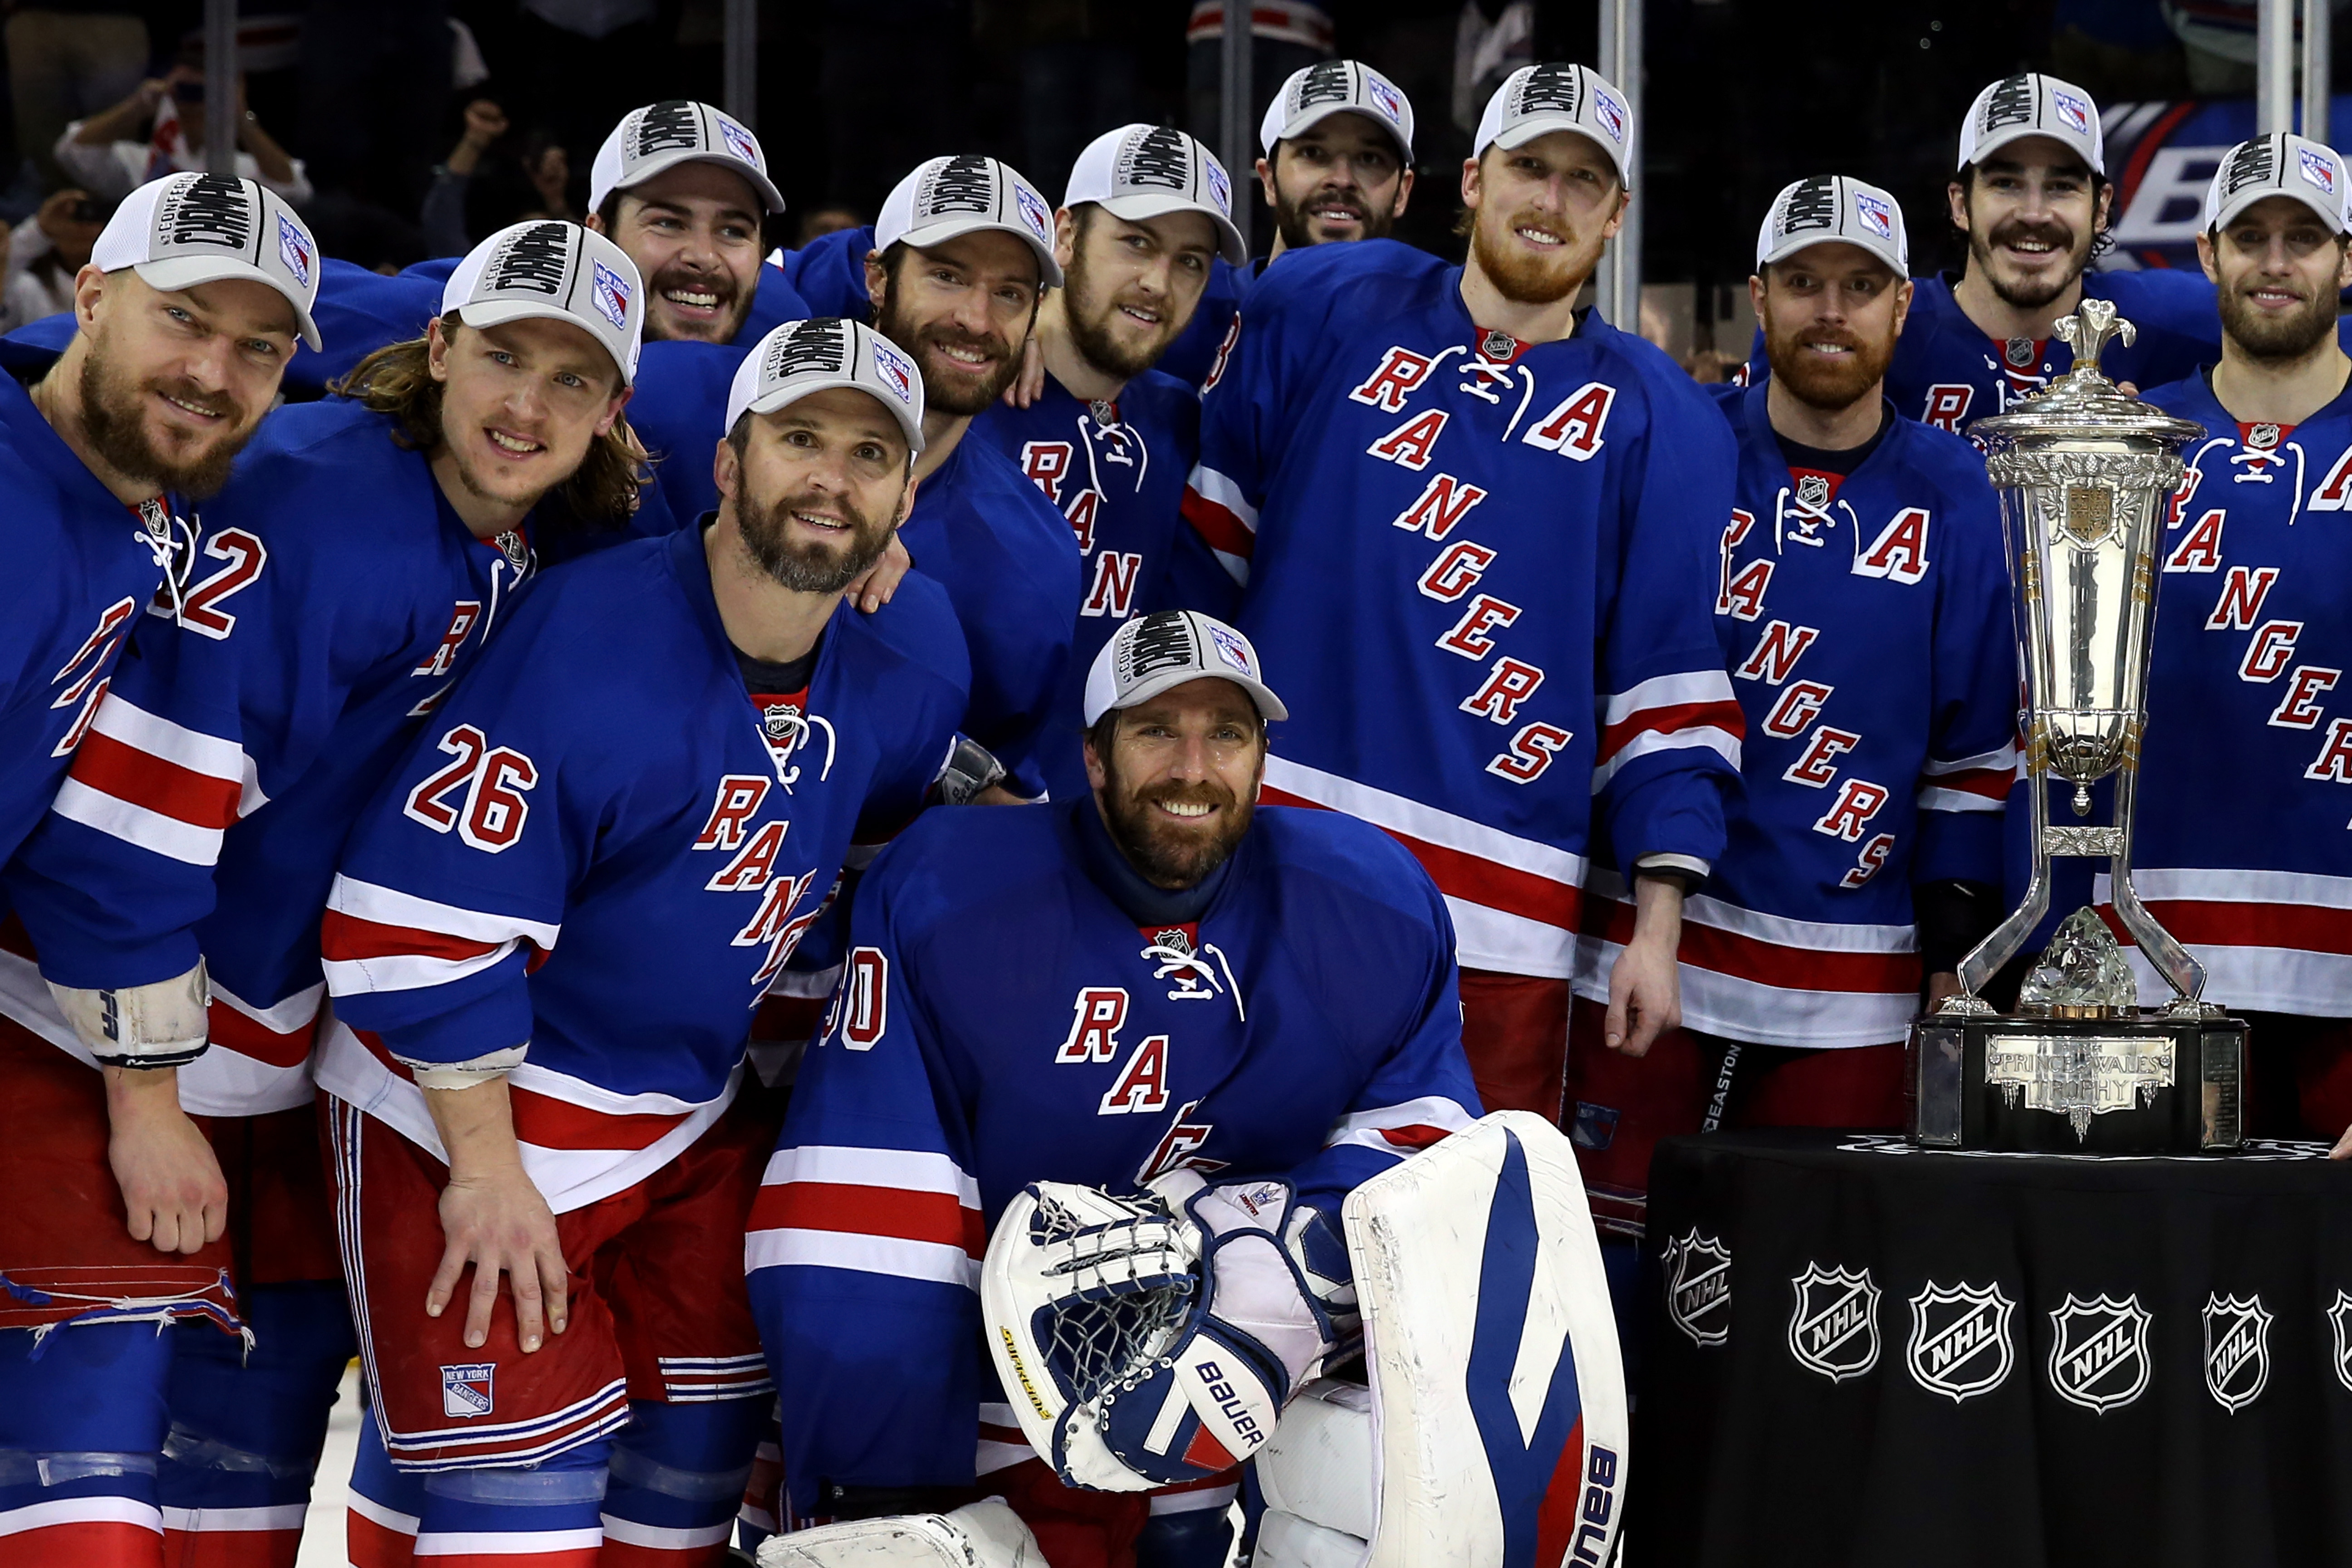 New Jersey Devils: Henrik Lundqvist Was An Honorable Rival